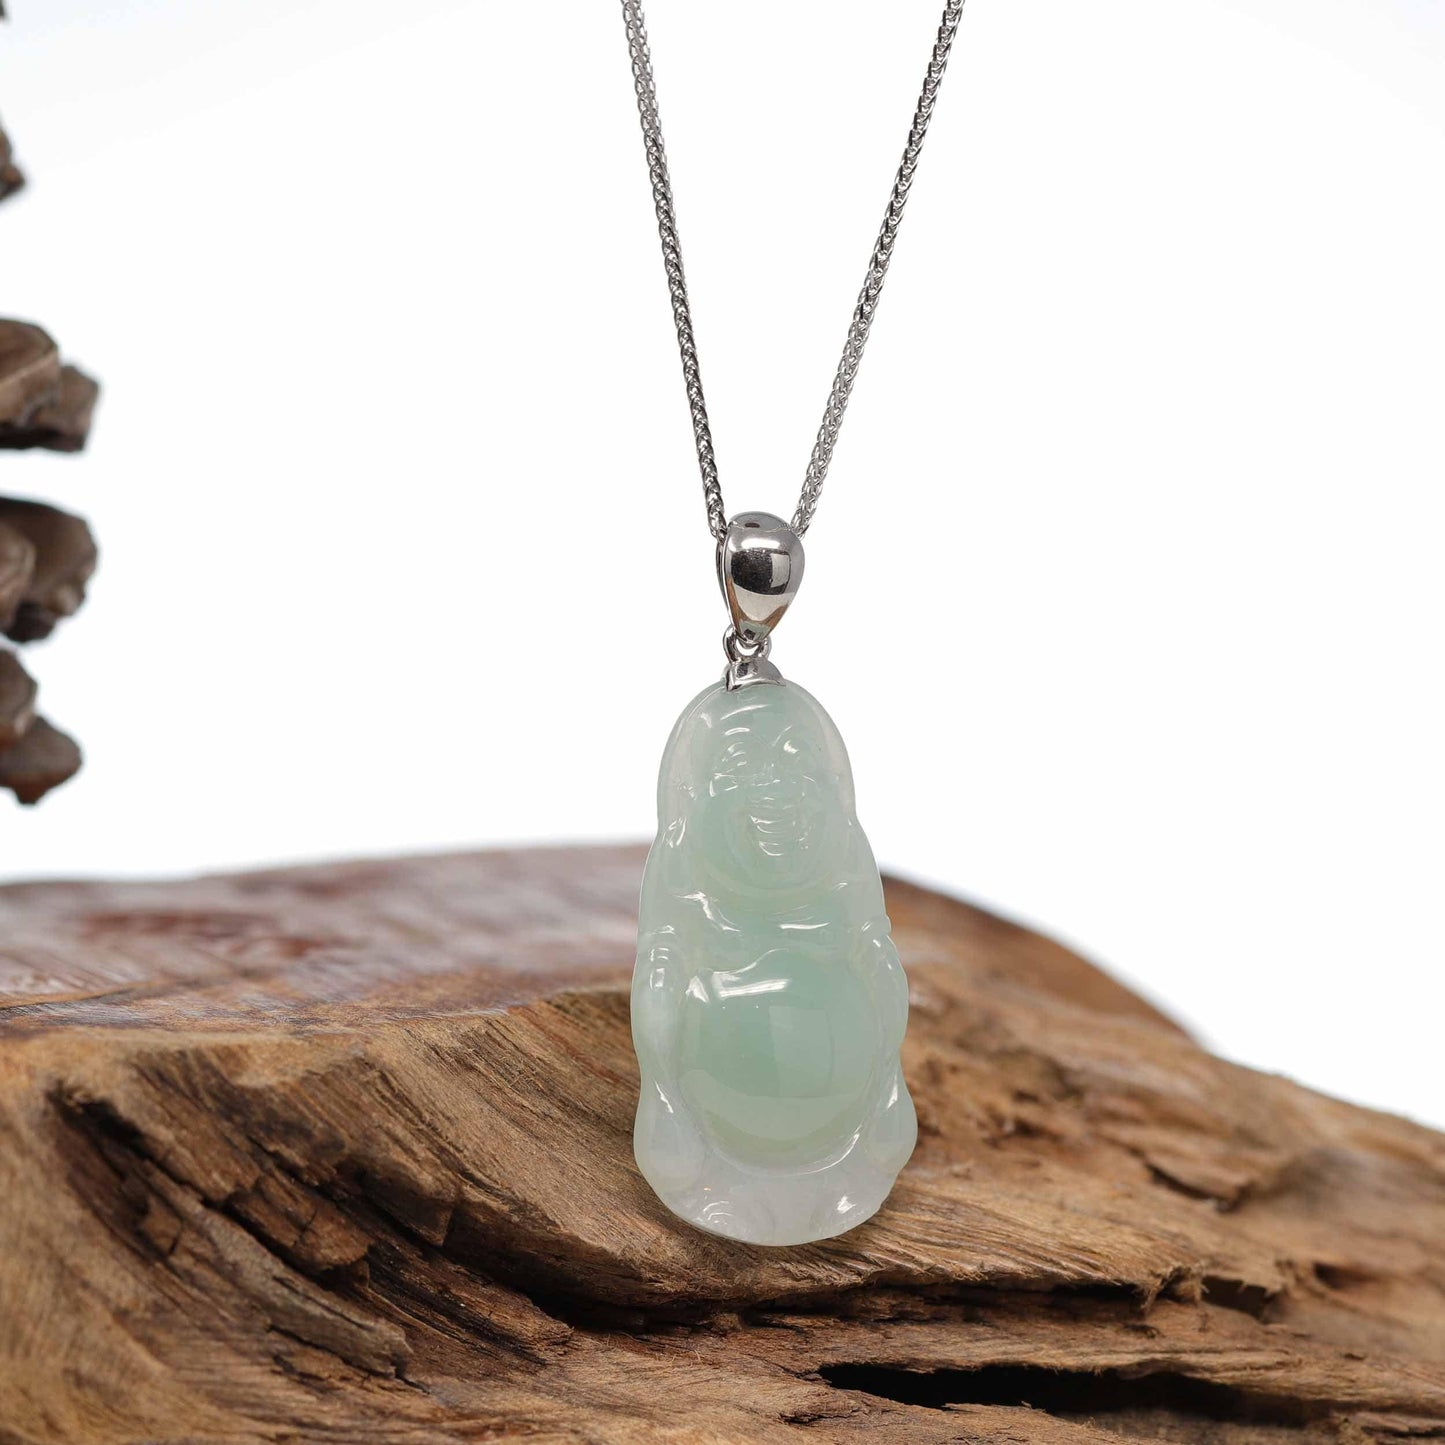 RealJade¨ Co.™ "Laughing Buddha" Genuine Green Jadeite Jade Buddha Pendant Necklace With Strong Silver  Bail